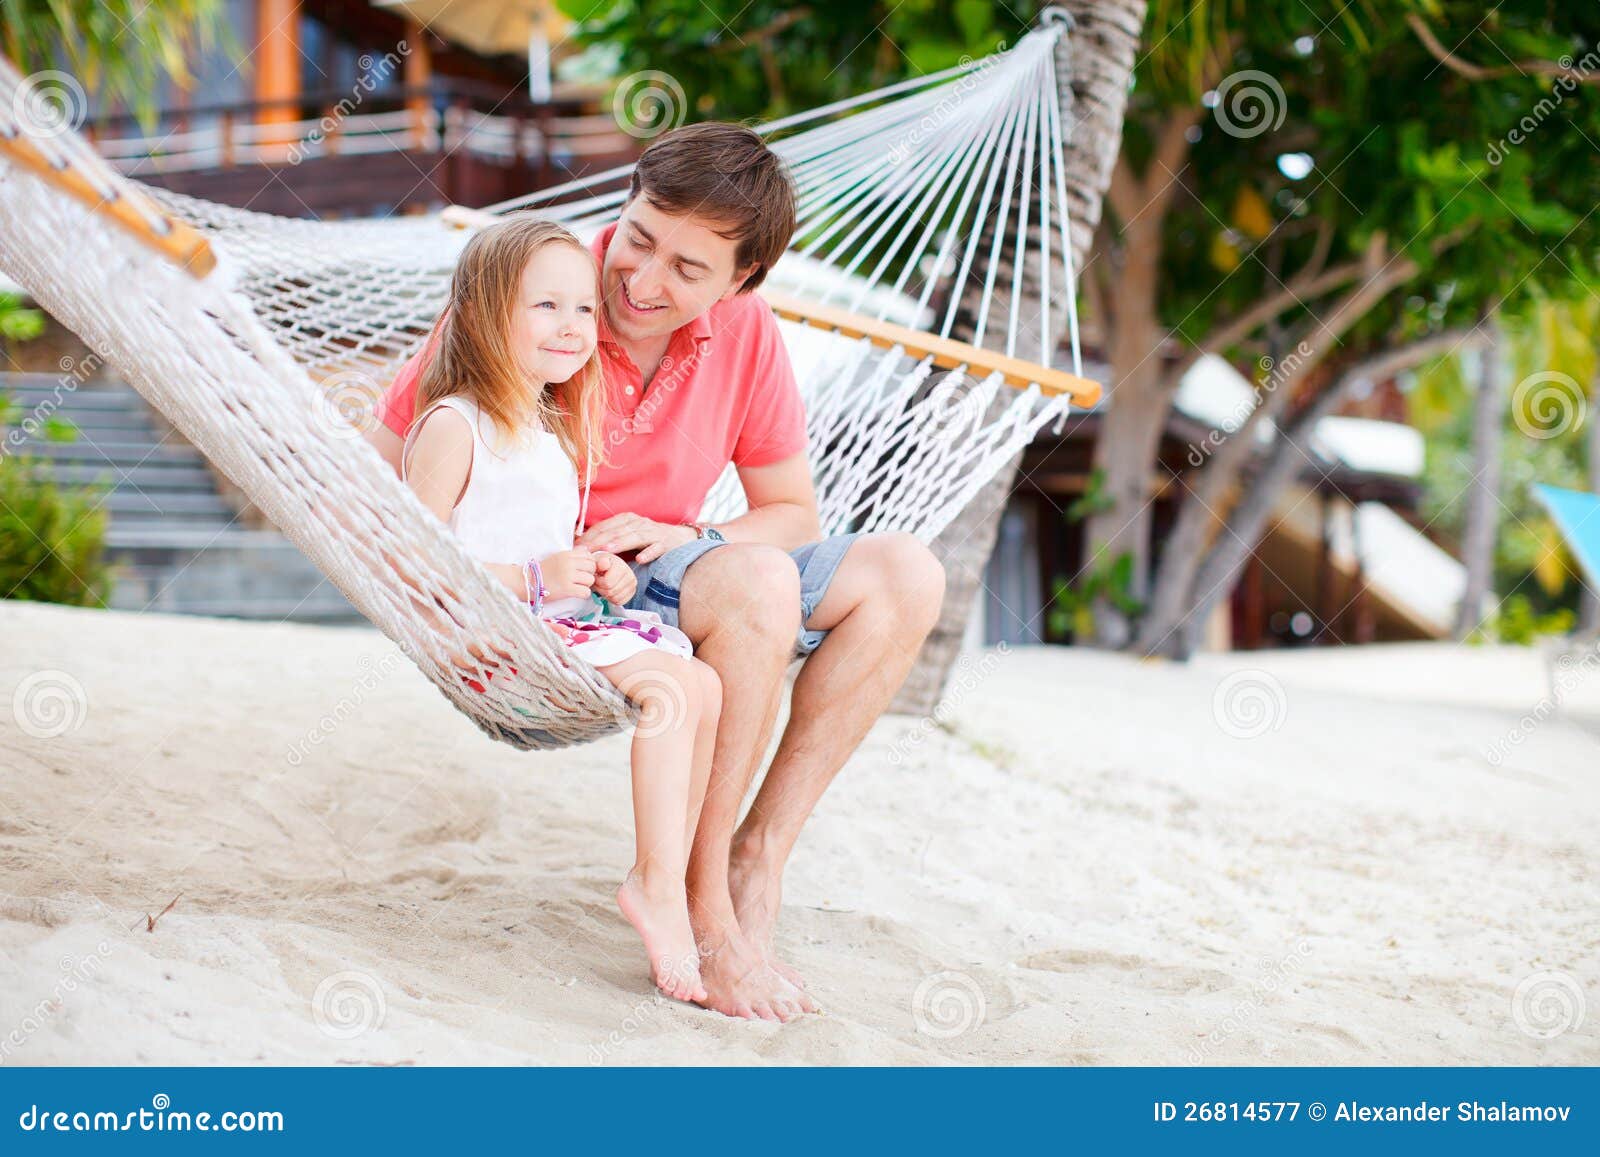 Father And Daughter On Vacation Stock Image - Image of 